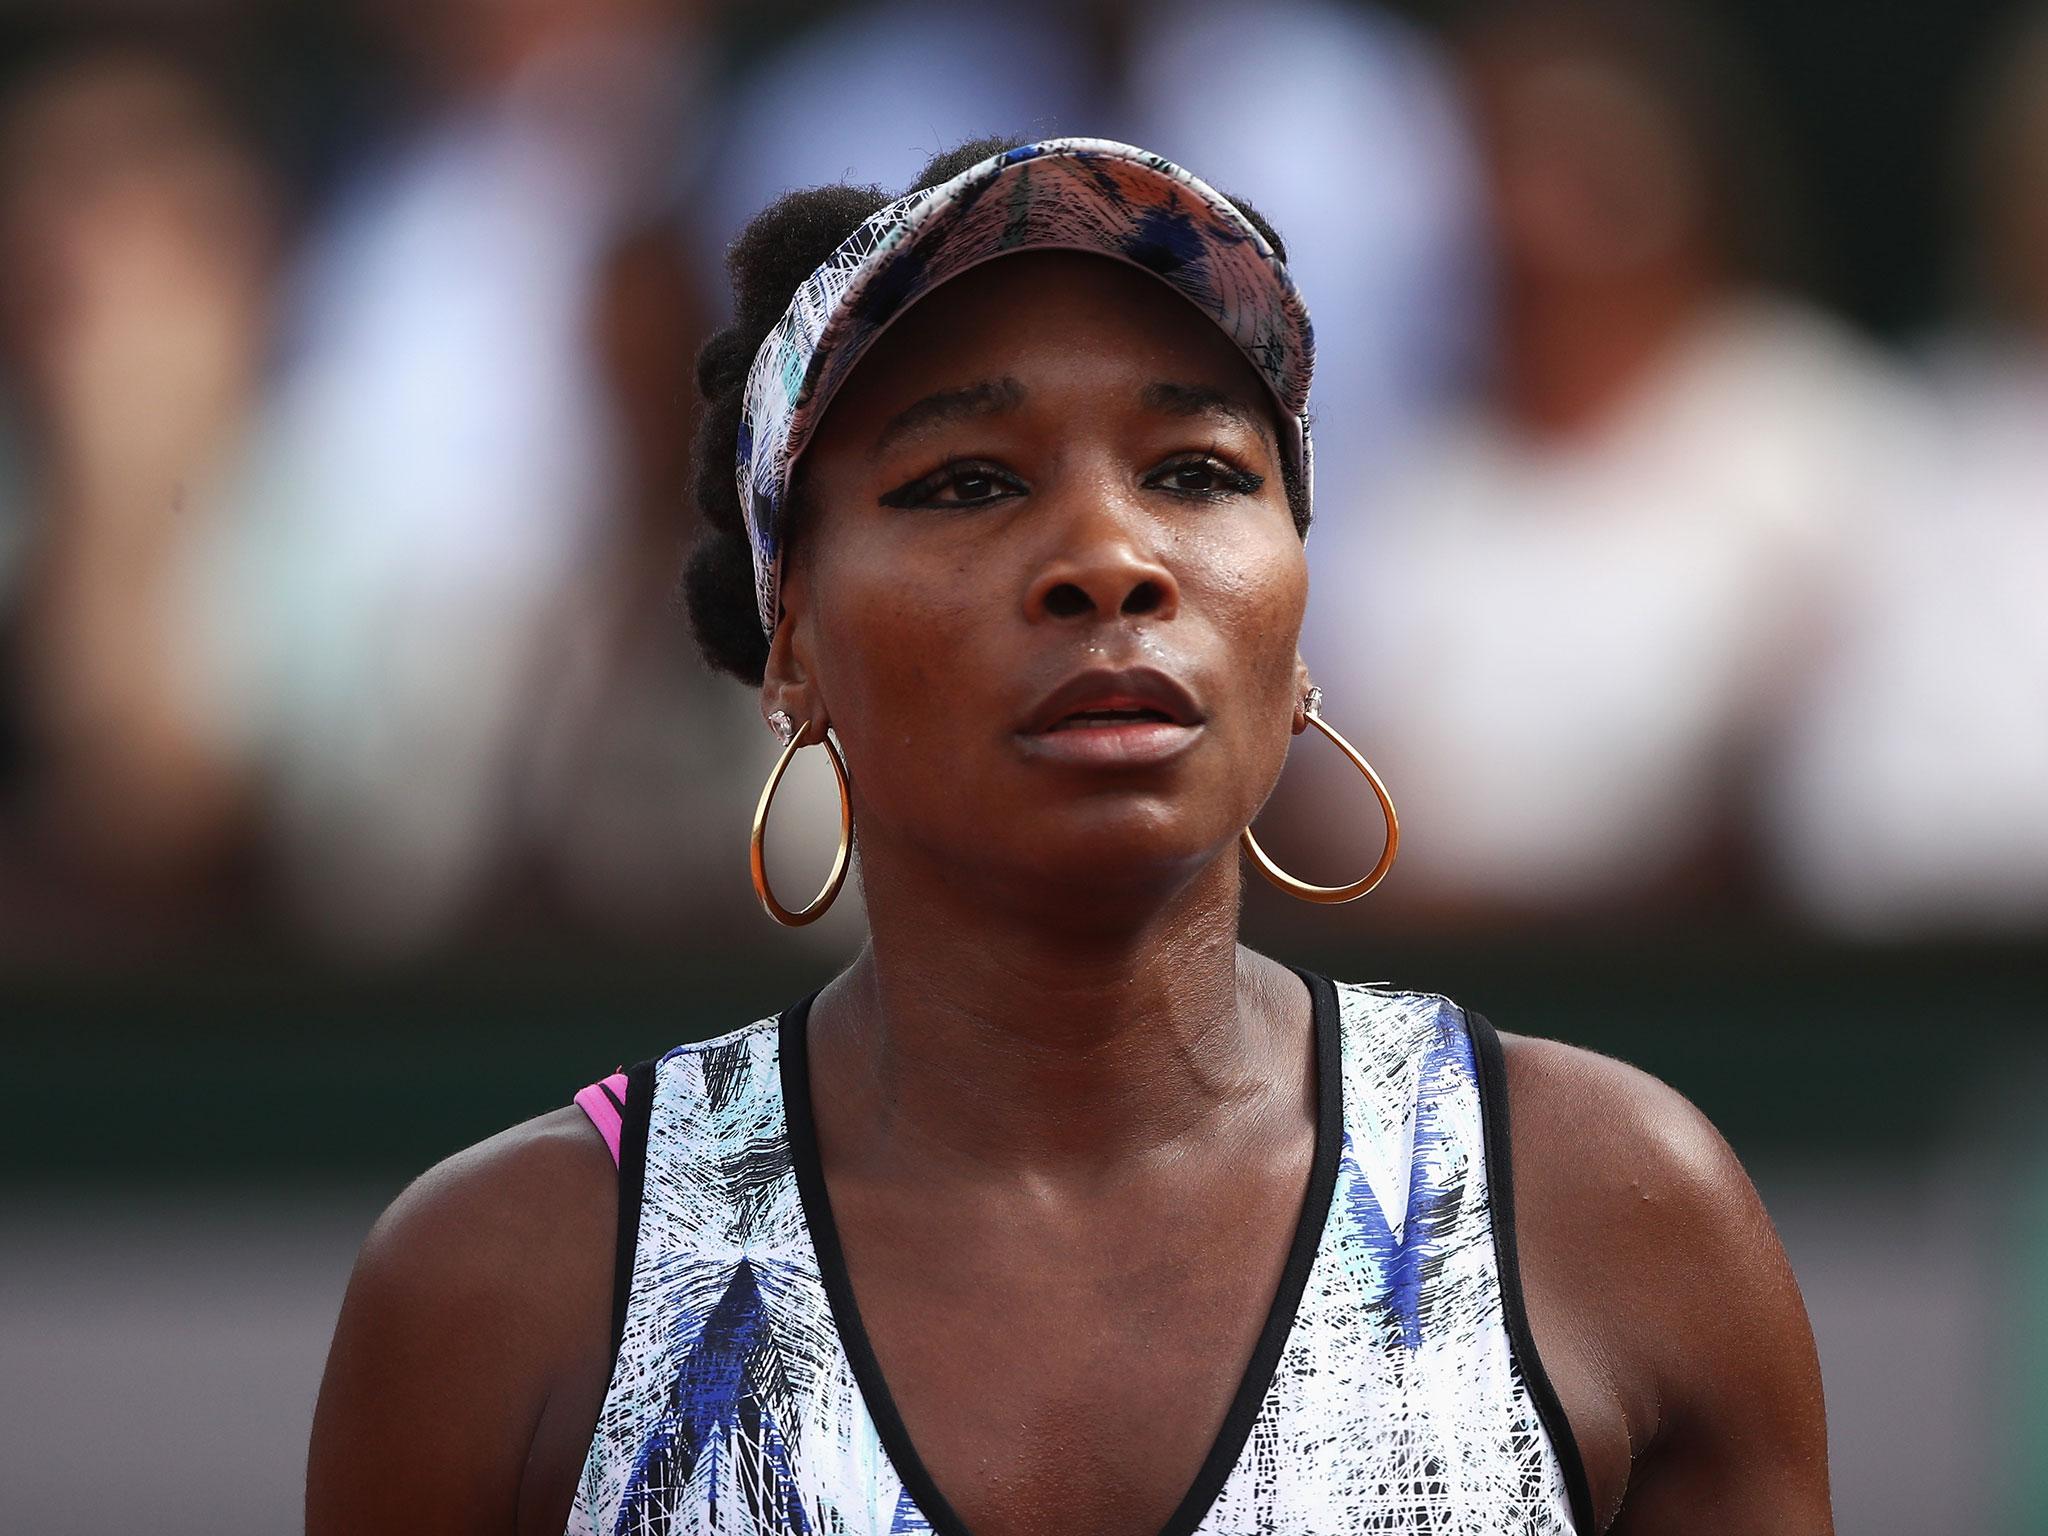 Venus Williams will be featuring at this year's Wimbledon